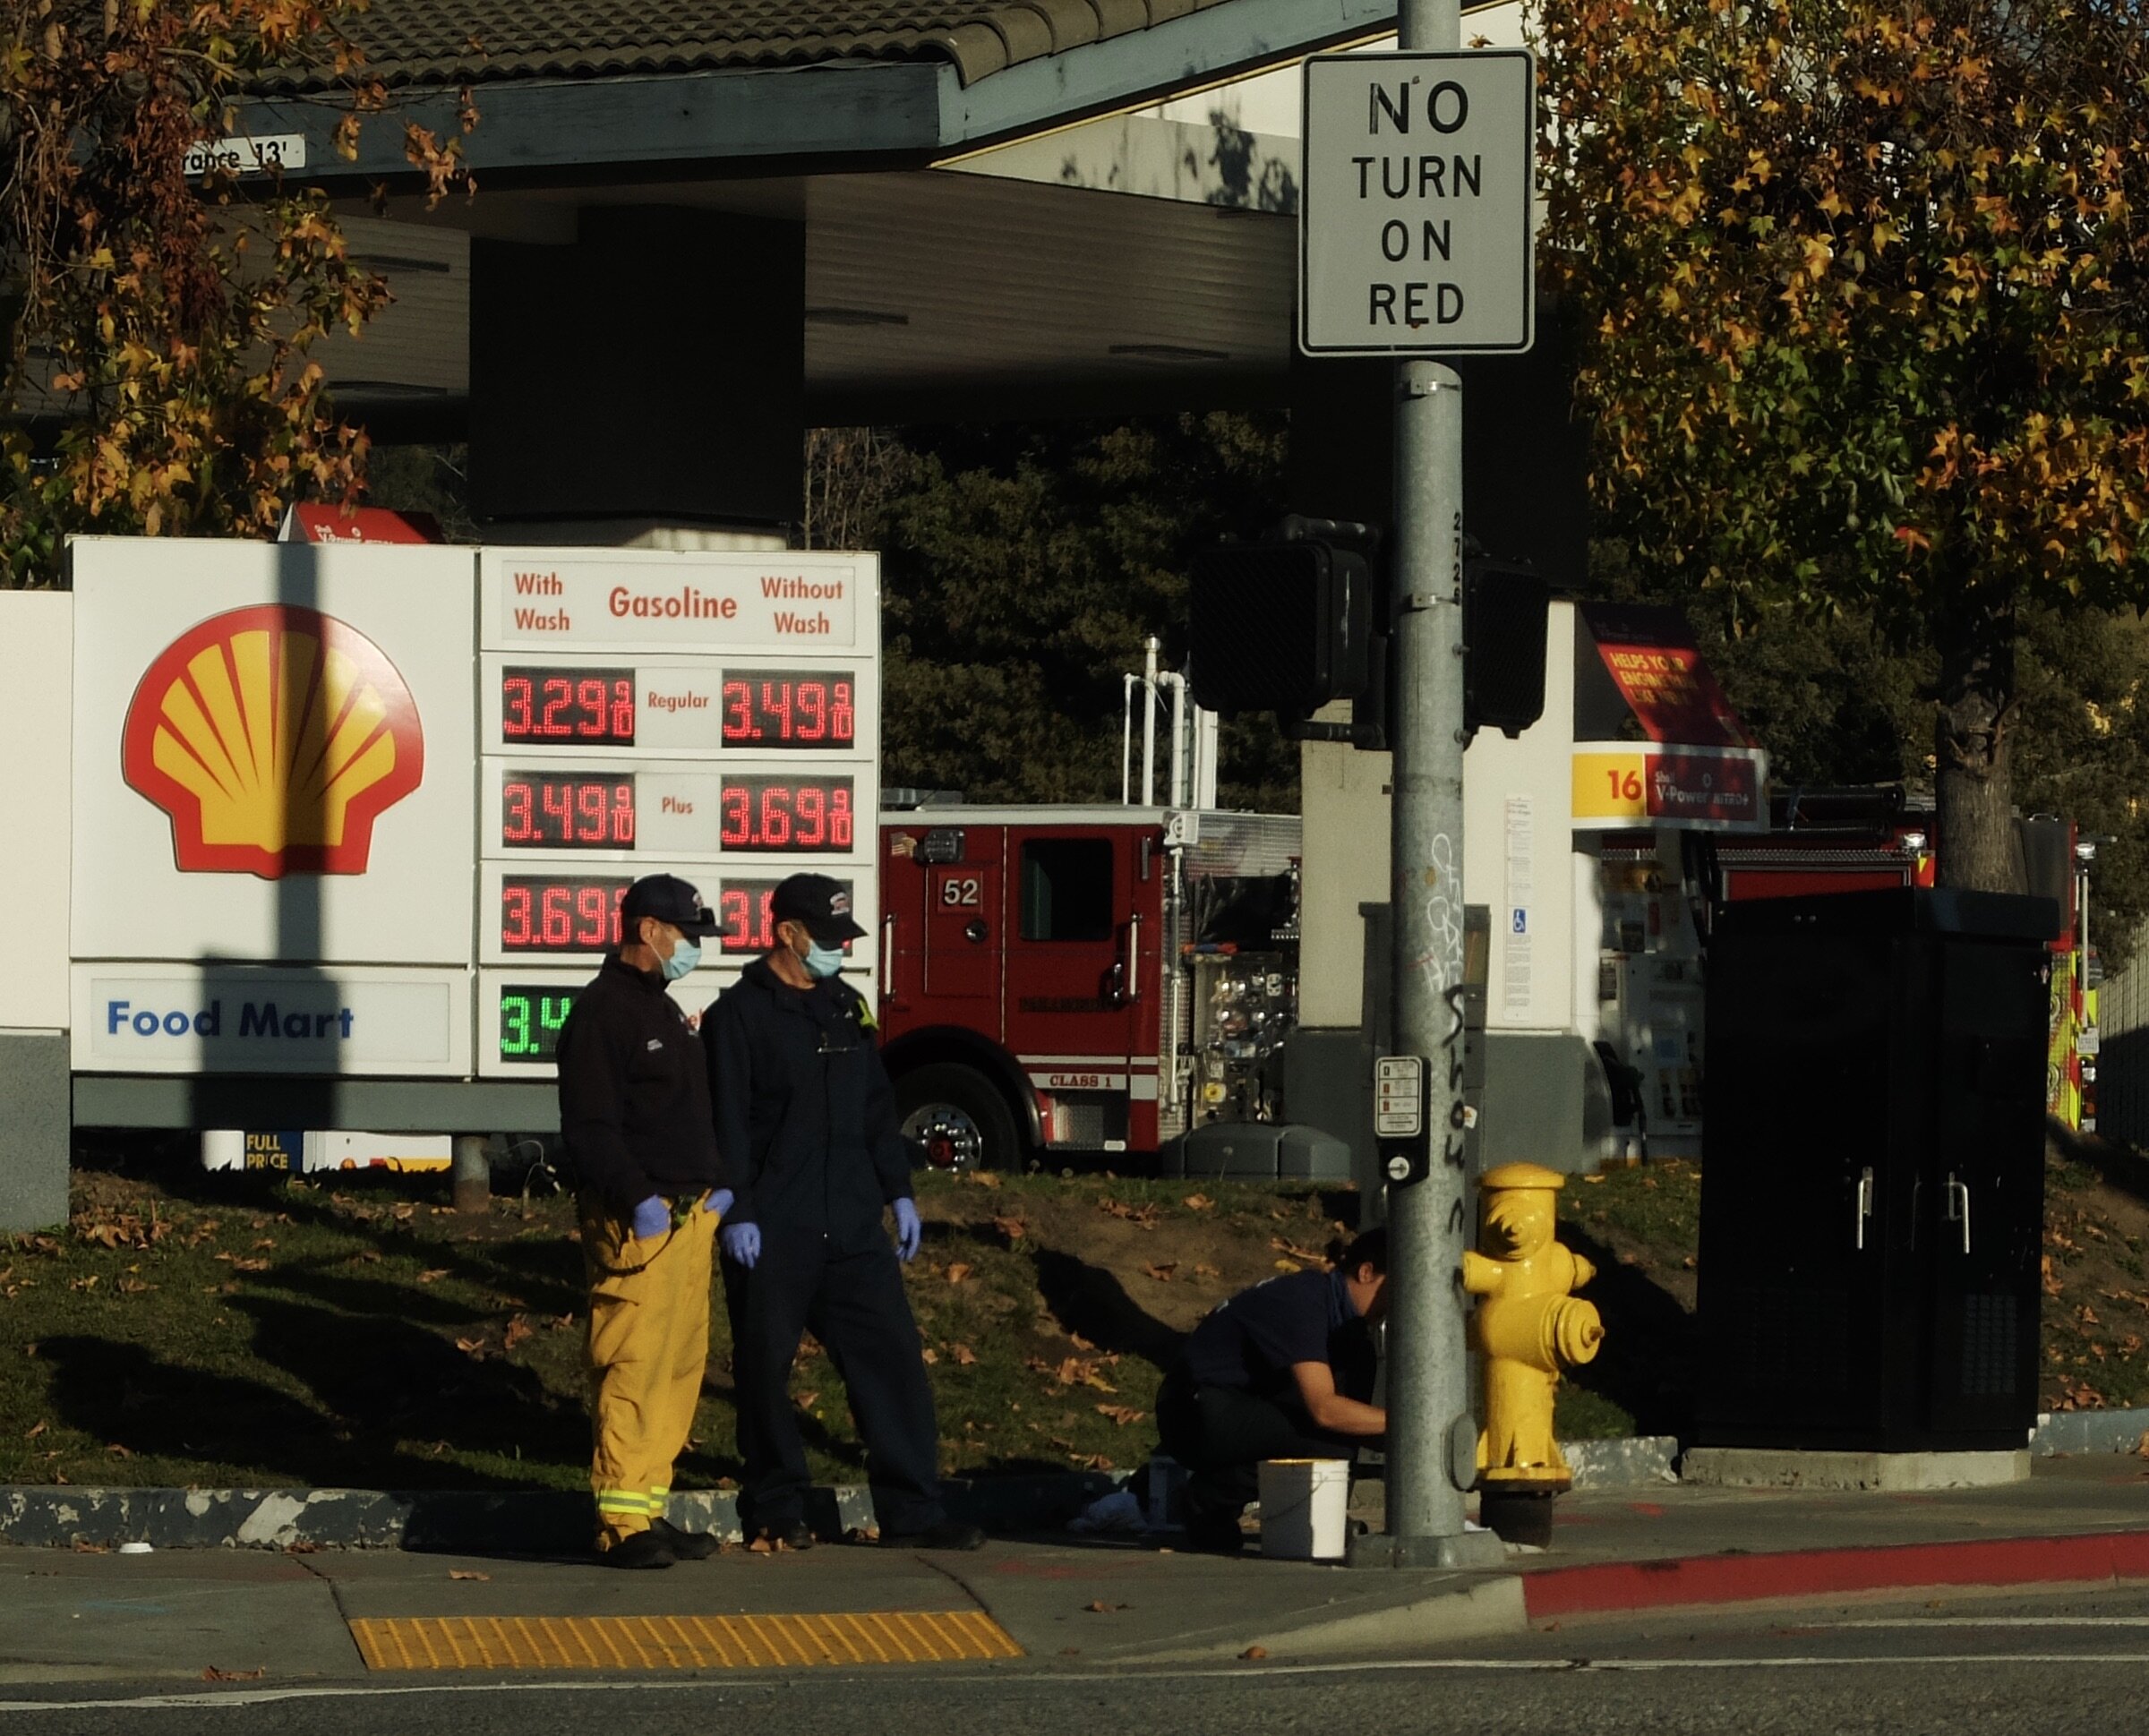 Painting a fire hydrant in San Rafael, CA. -  Two firemen watching while a firewoman paints.